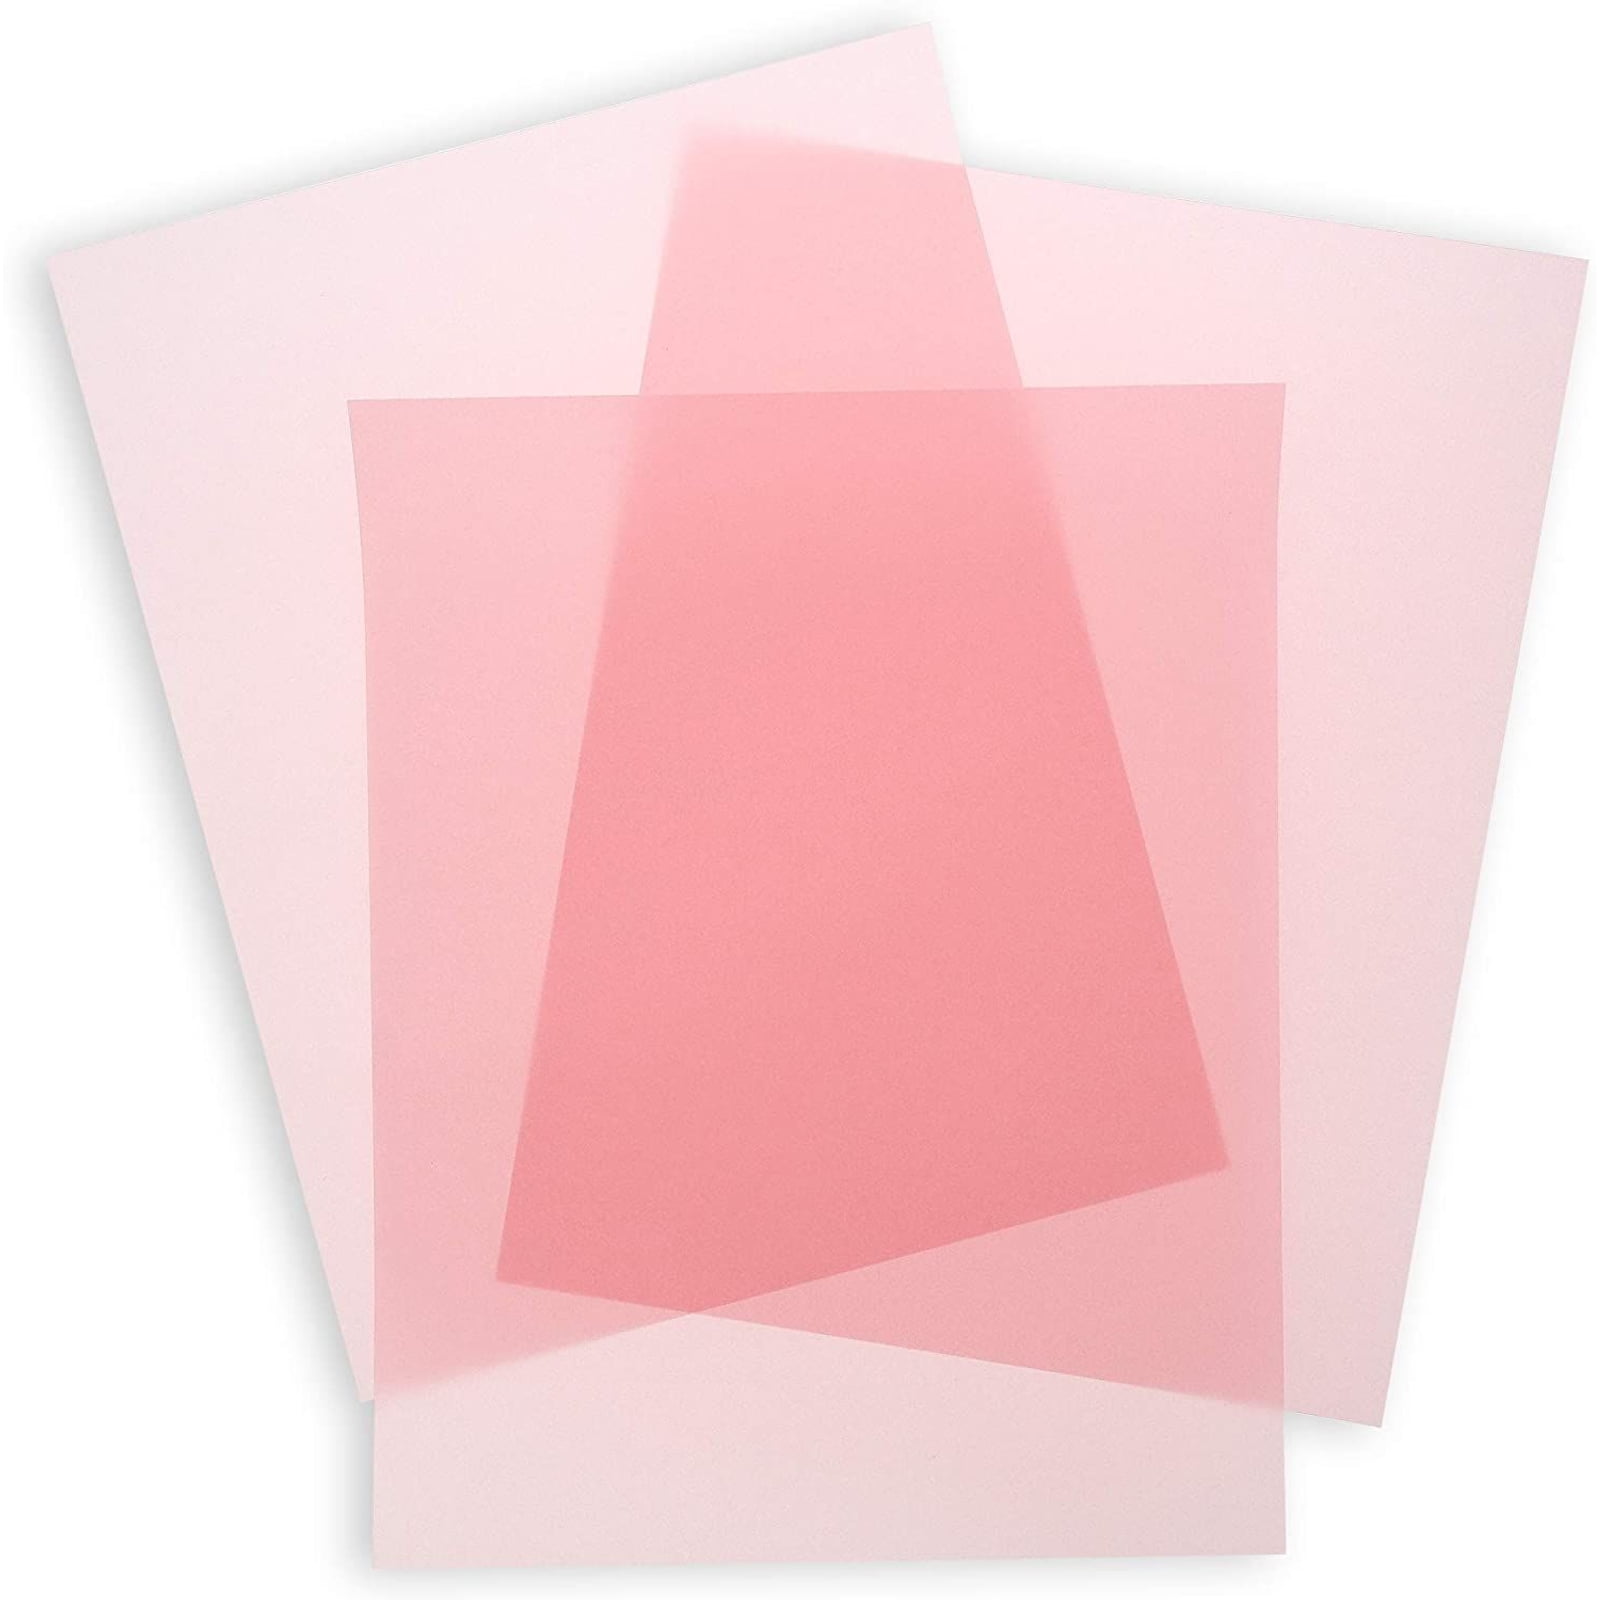 Vellum Paper 8.5 x 11 Translucent Printable, [110 Sheets] 93 GSM  Transparent Clear Paper for Tracing, Invitations, Envelope, Sketching, and  Drawing